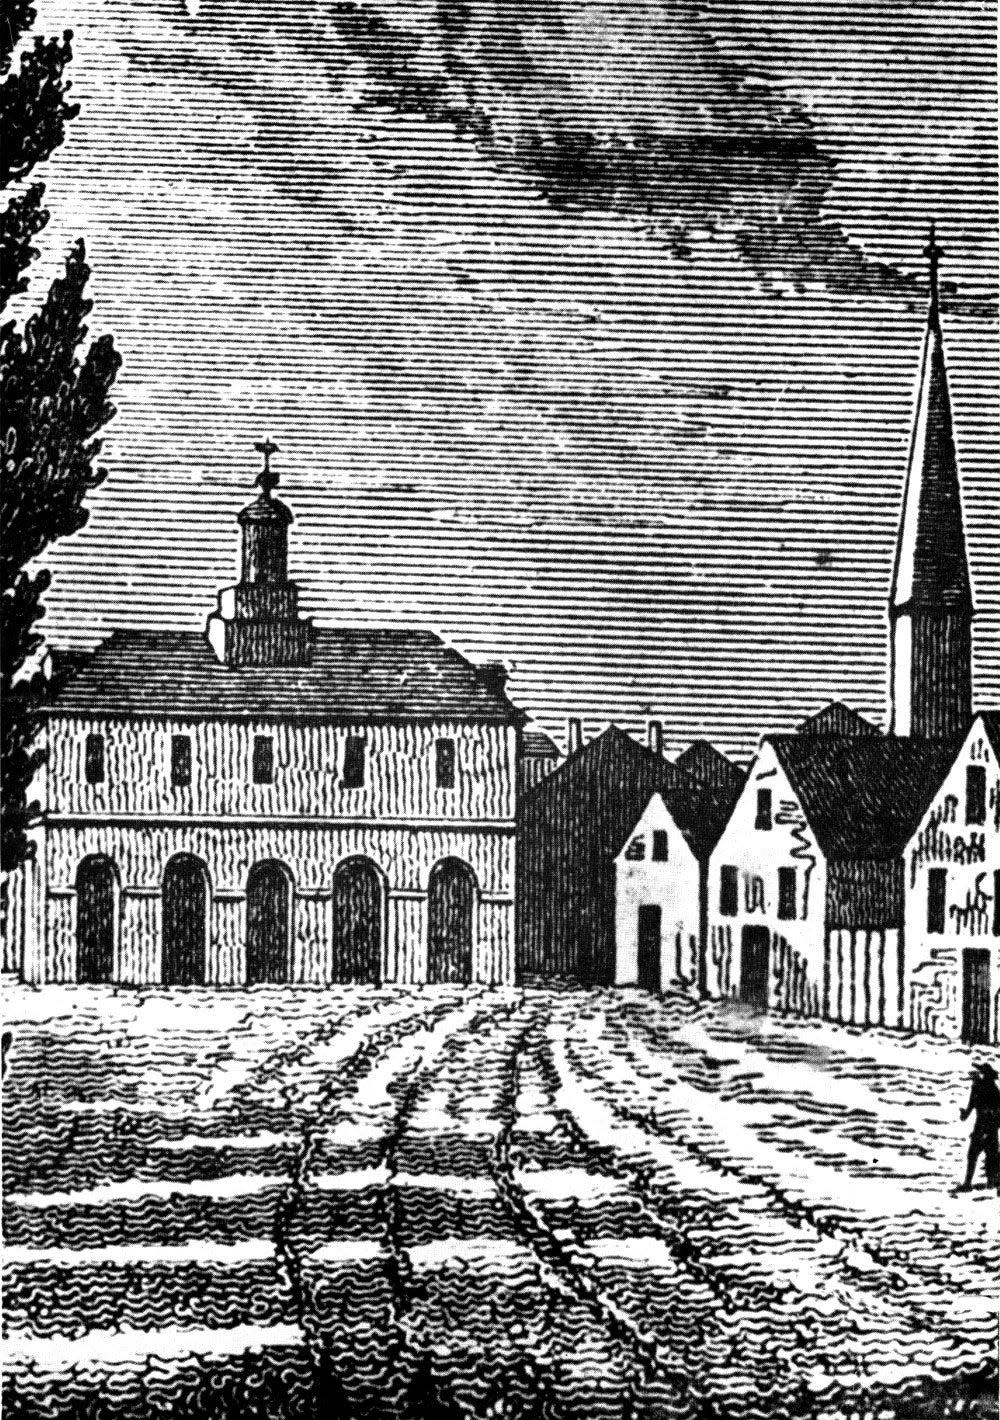 Drawing of the State House in downtown Fayetteville which was located where the Market House now stands. The state house stood from 1789-1831.